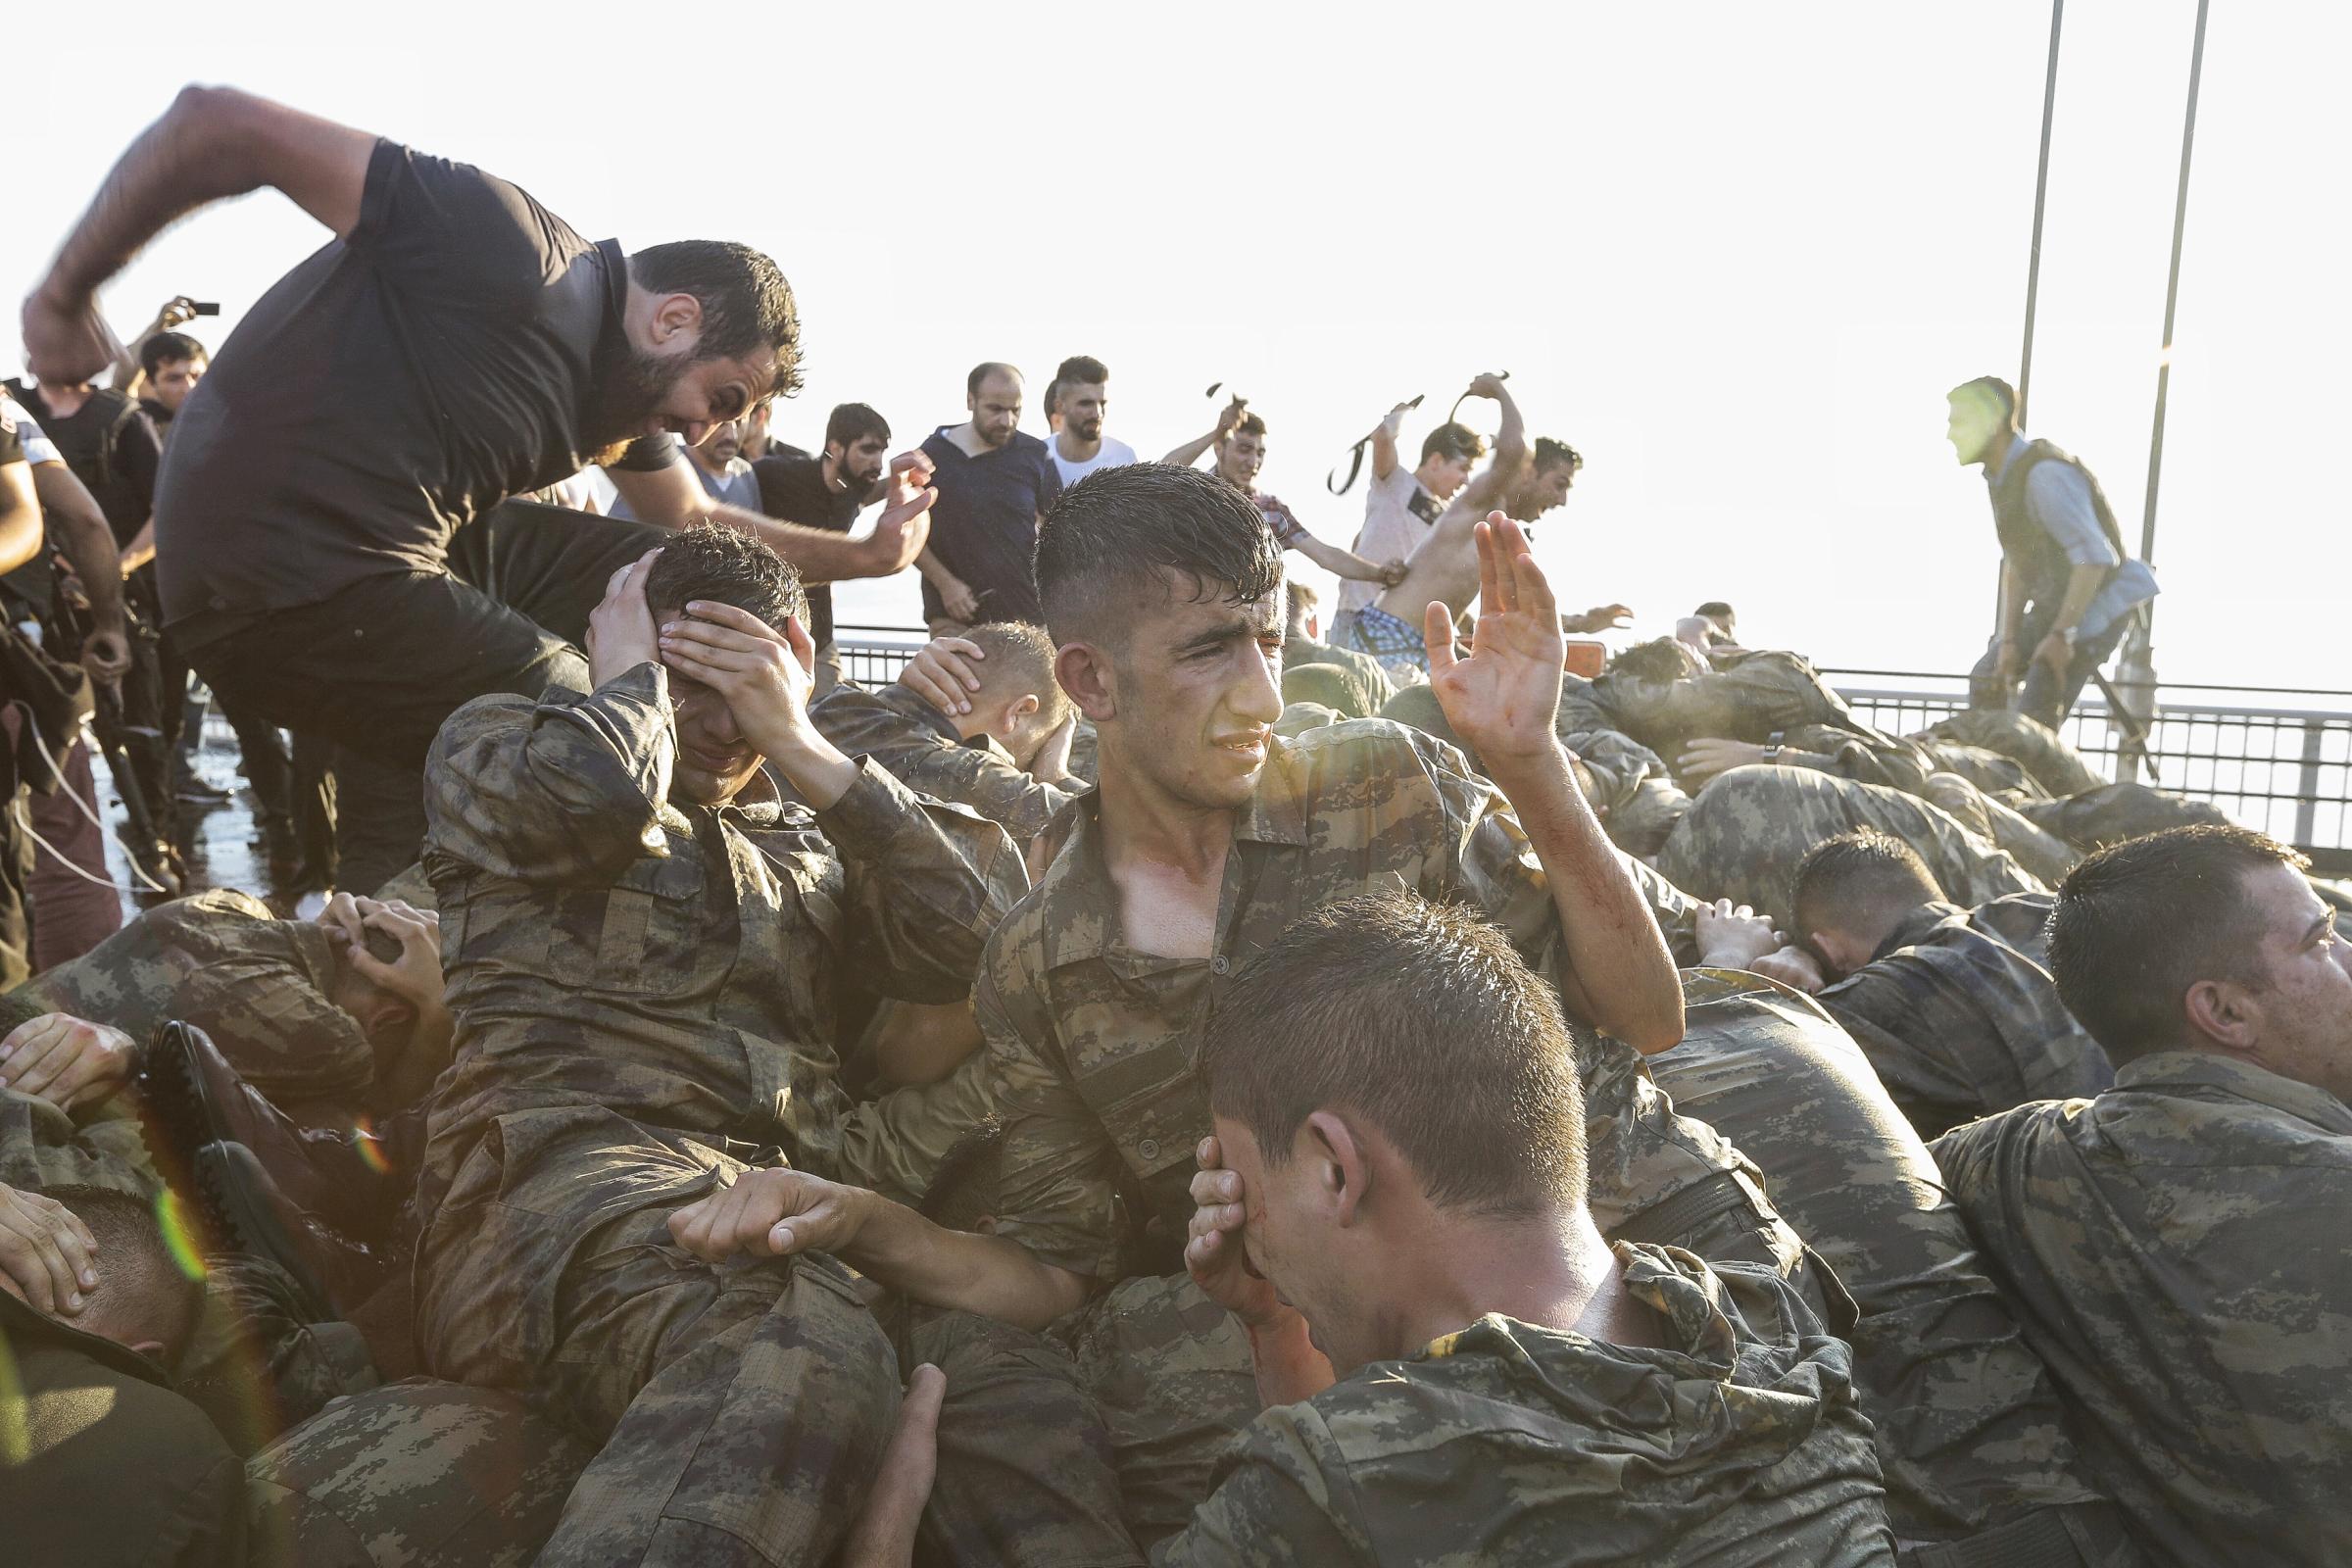 Soldiers involved in the coup attempt surrender on the Bosporus Bridge in Istanbul, Turkey, on July 16, 2016.